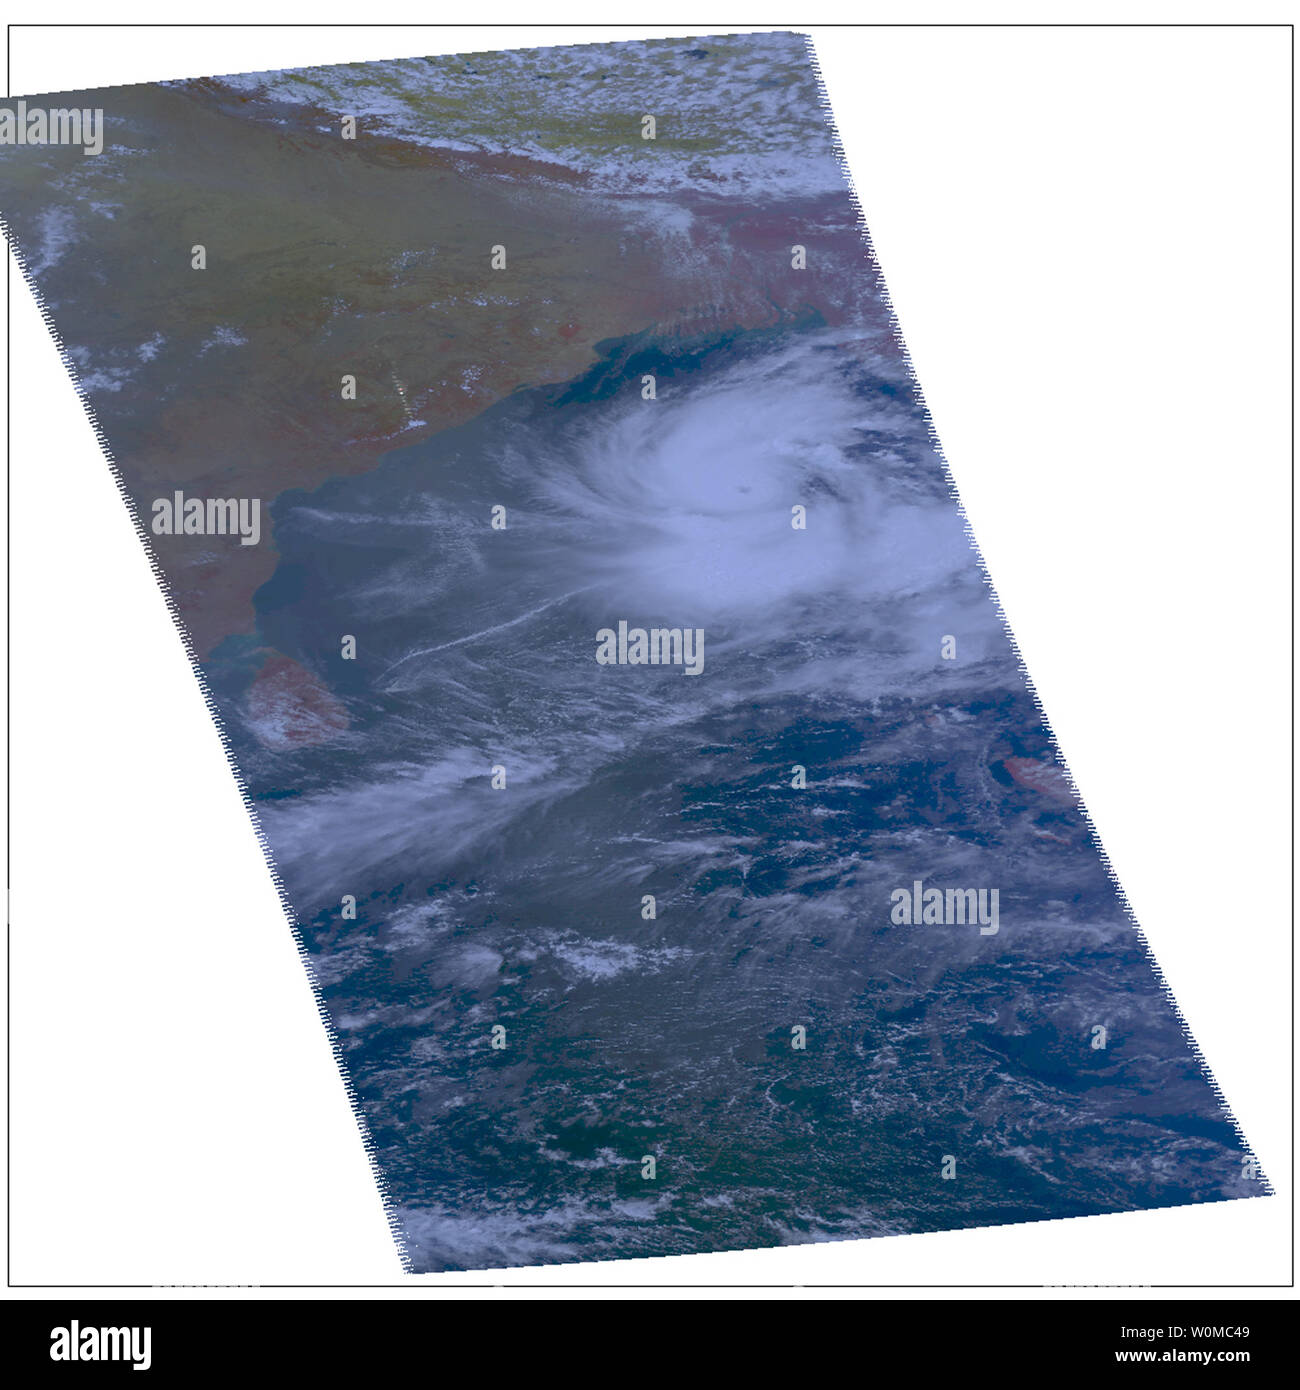 In this image from NASA's Atmospheric Infrared Sounder instrument on NASA's Aqua spacecraft, Cyclone Nargis is pictured when it was a Category one hurricane located 370 miles west of Yangon, Myanmar on May 1, 2008. Tropical Cyclone Nargis flooded the region on May 4, 2008. The death toll from the cyclone and its aftermath is feared to hit or exceed 100,000 lives. (UPI Photo/NASA/MODIS Rapid Response Team) Stock Photo